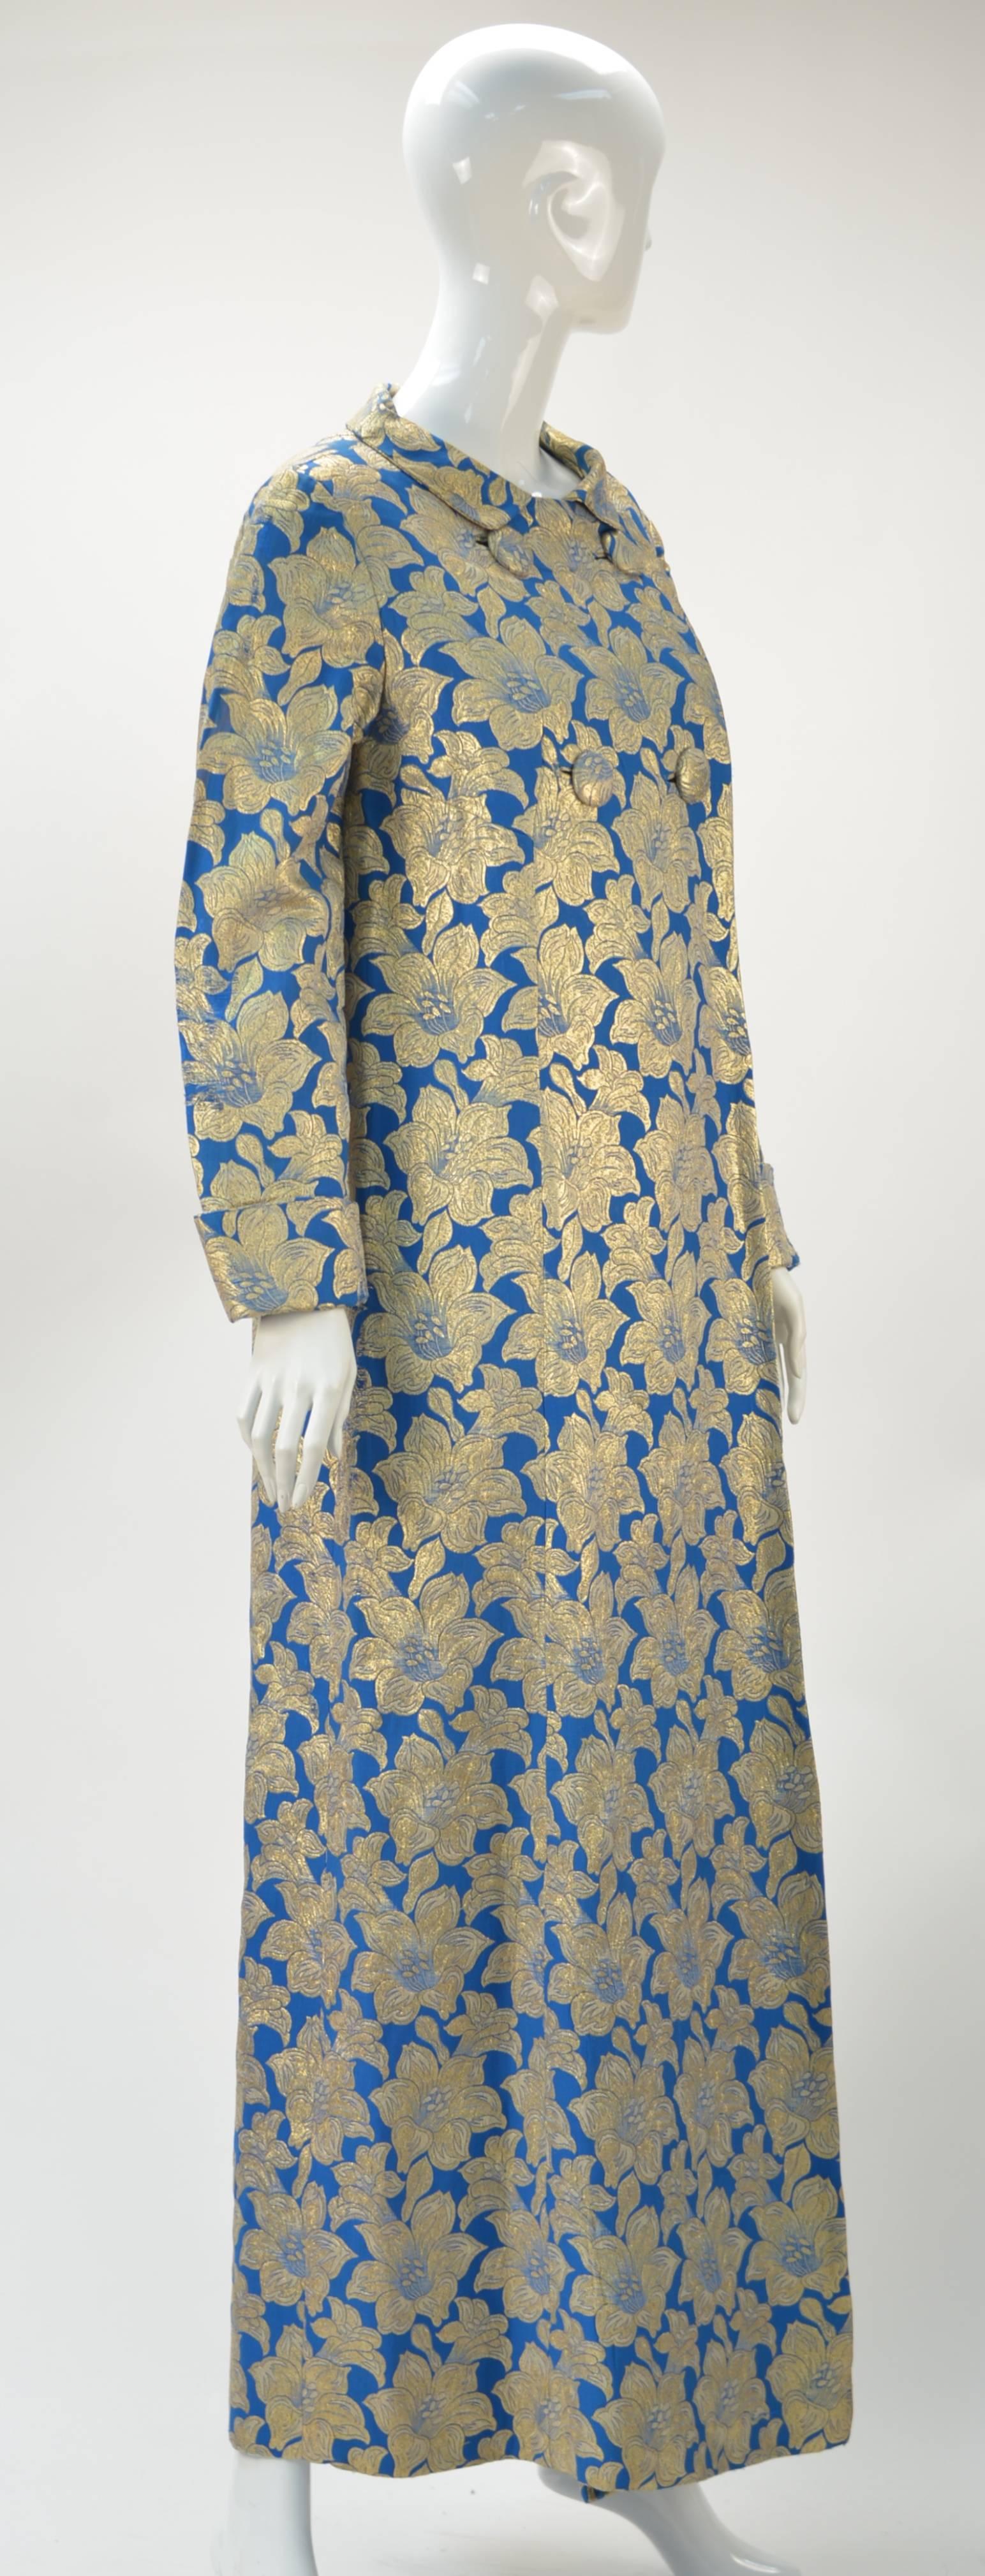 Gorgeous 1960's Blue with gold metallic floral print brocade long evening coat. Make a statement at any party this year. Wear it as your dress with something covering that which you might want hidden underneath. We've paired it with a skin tone cat